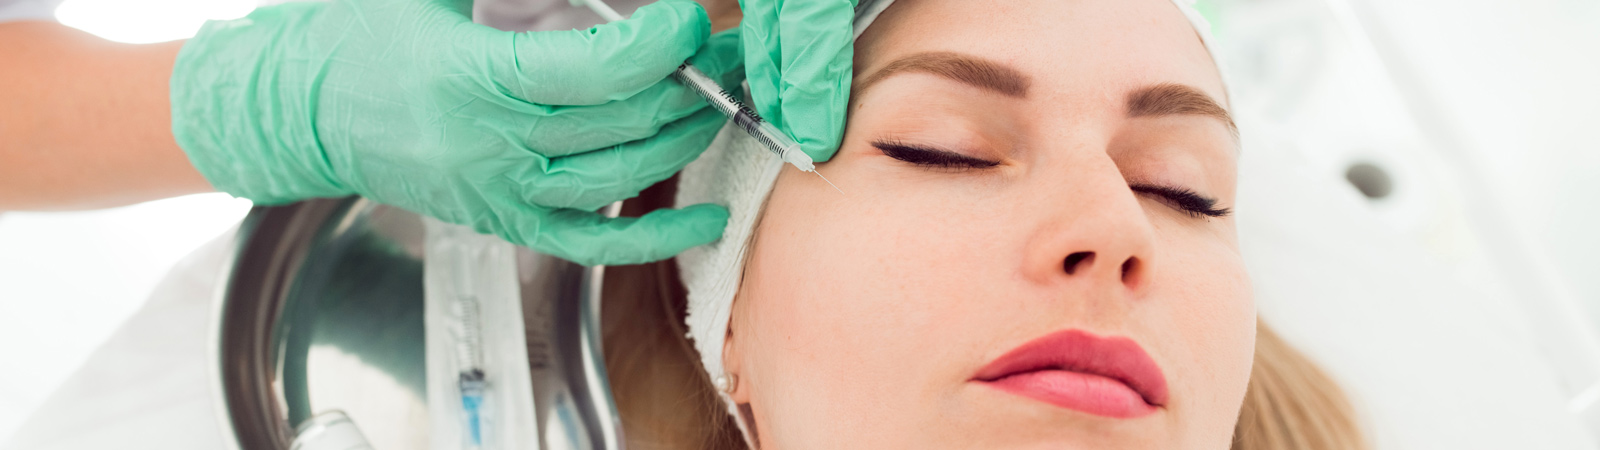 Where Are the Most Common Areas for Botox Injections?